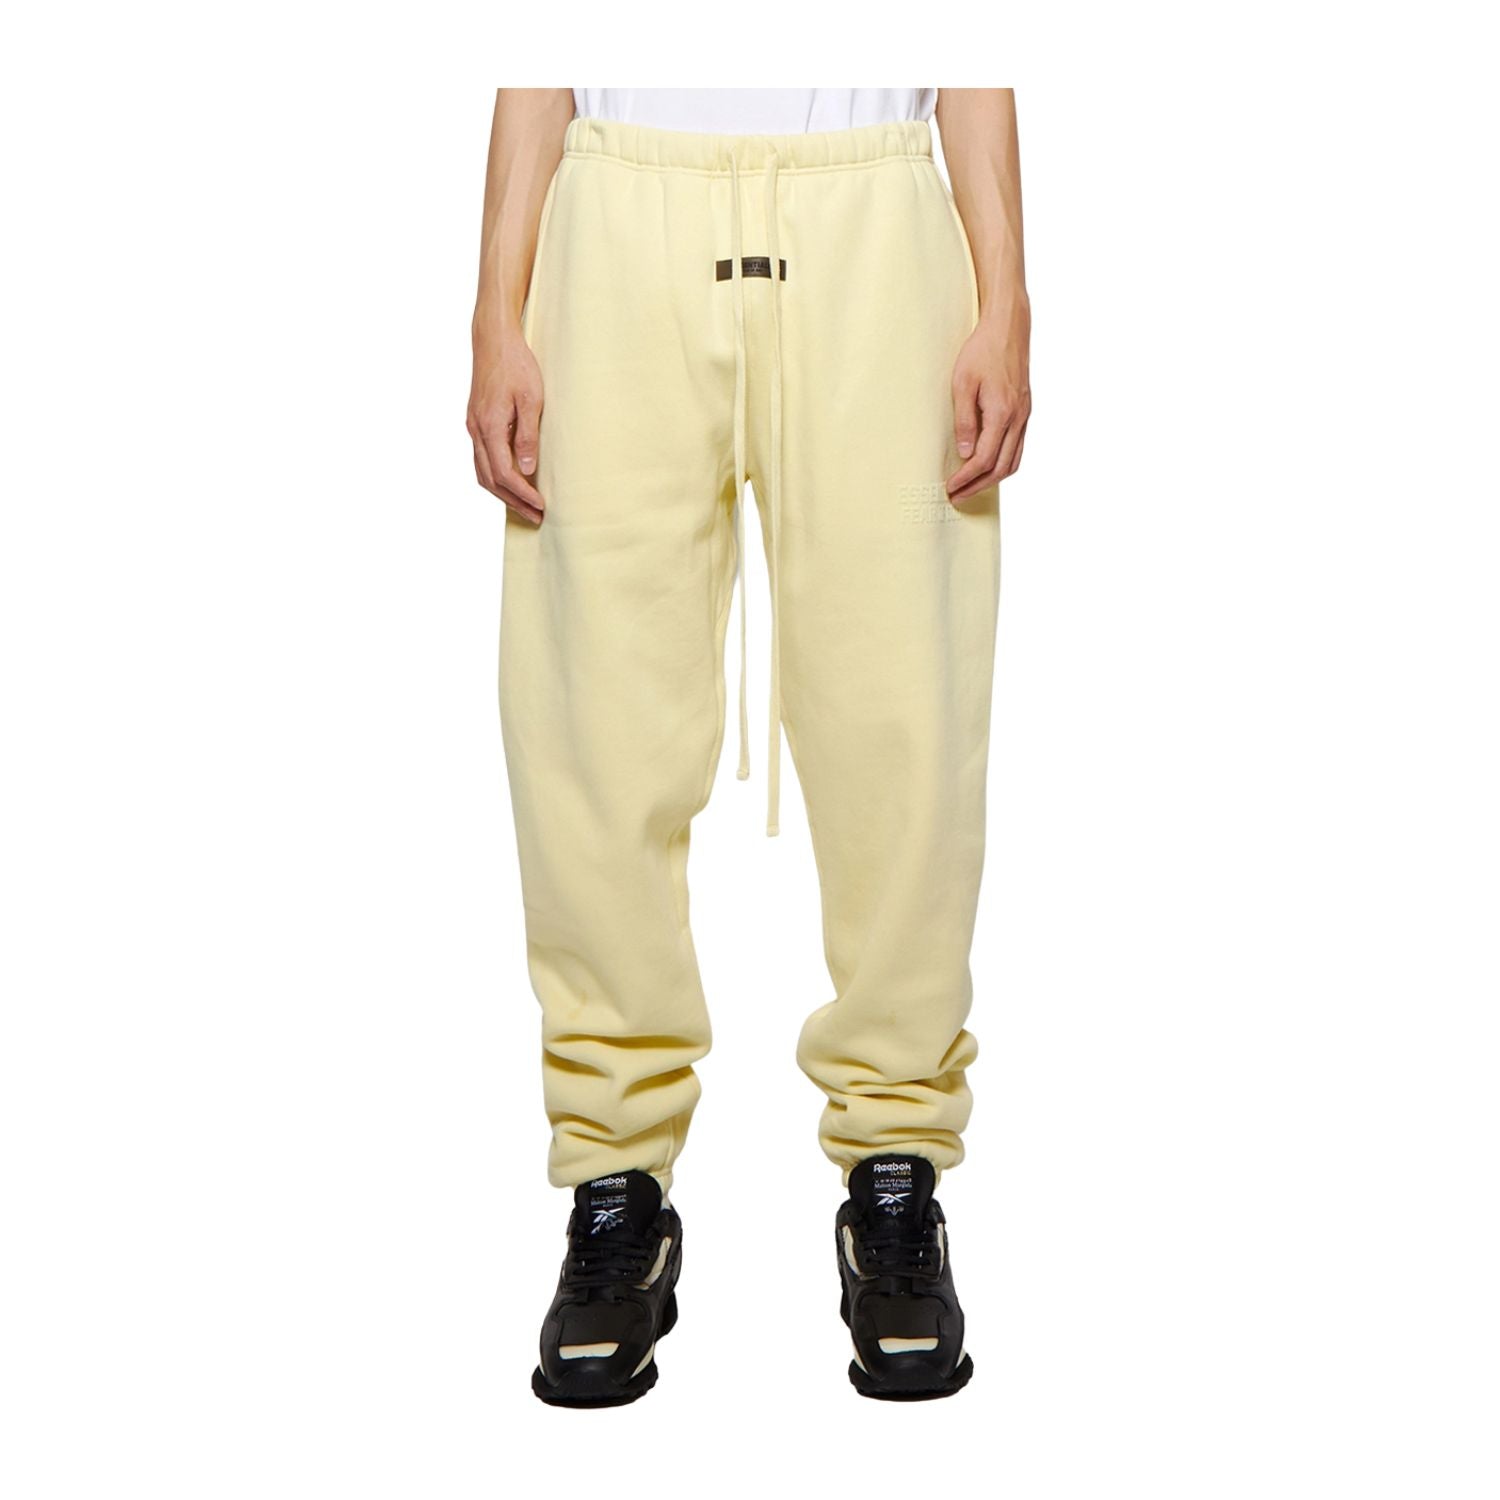 Essentials Essentials Fear Of God  Mens  Canary  Sweat Pant  Mens Style : Fgmj2006